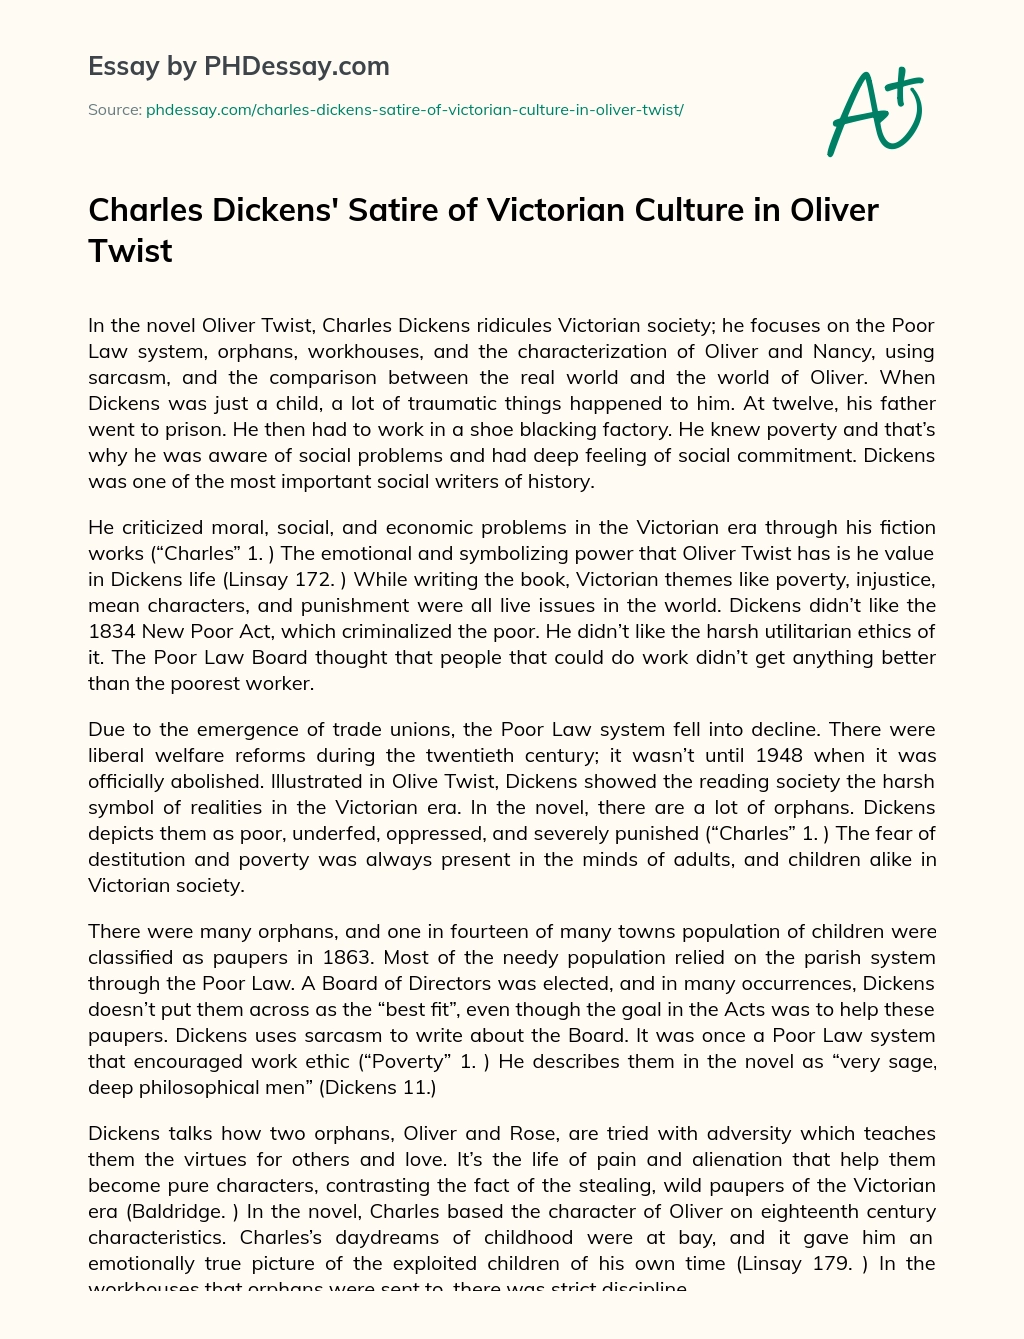 Charles Dickens’ Satire of Victorian Culture in Oliver Twist essay